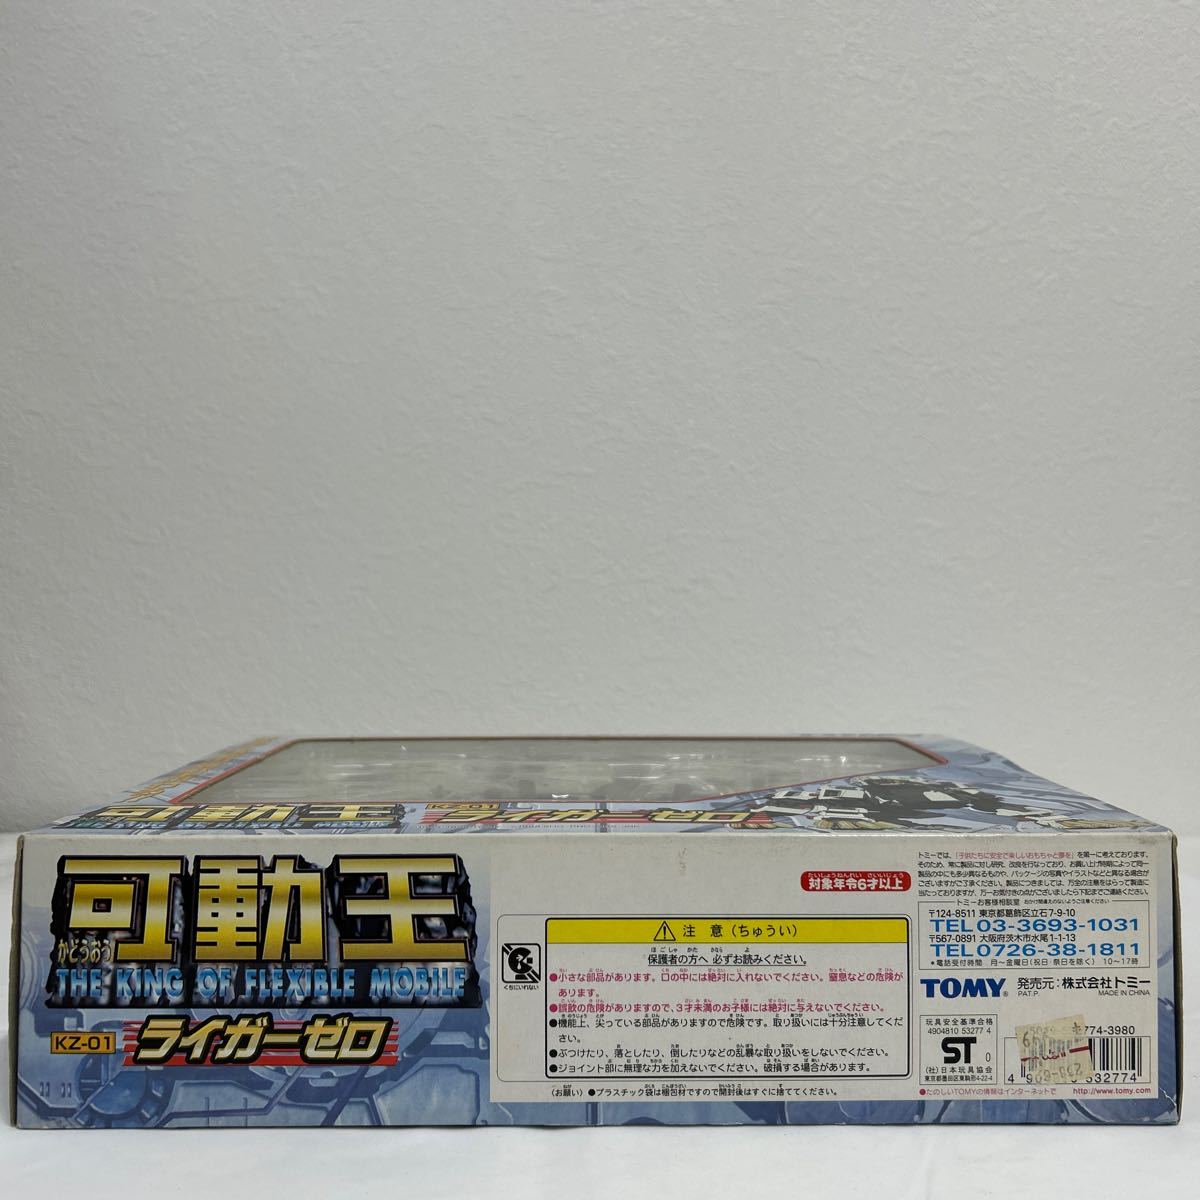  unopened TOMY ZOIDS KZ-01 LIGER ZERO Tommy Zoids moveable .lai gauze ro lion type figure that time thing 